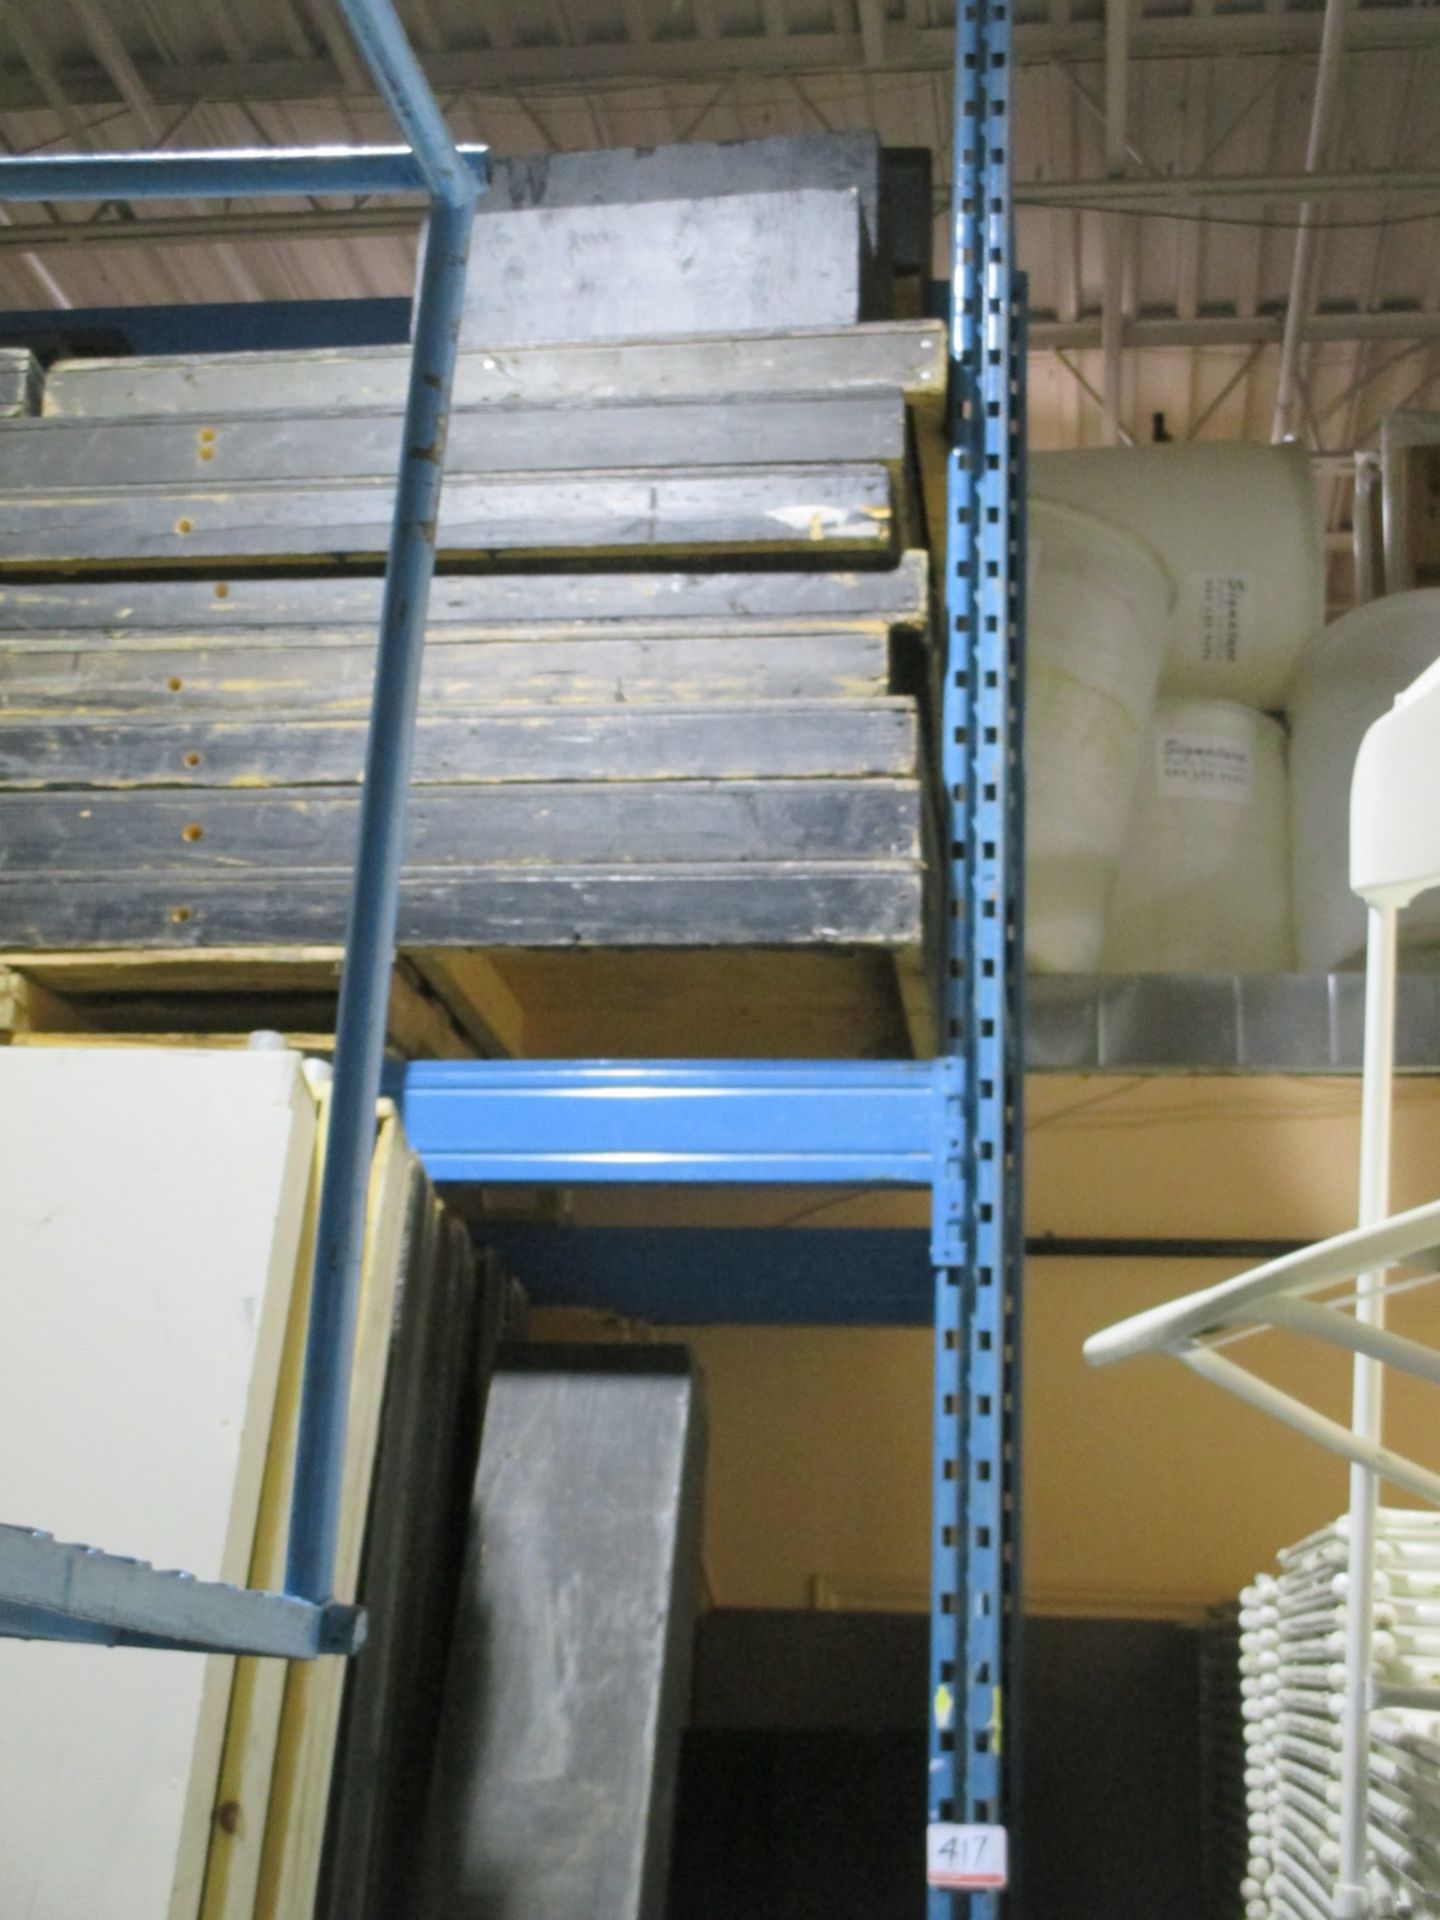 SECT - DARK BLUE 42" X 9' X 12 + 14' H RACKING (6 STRINGERS) - Image 2 of 2